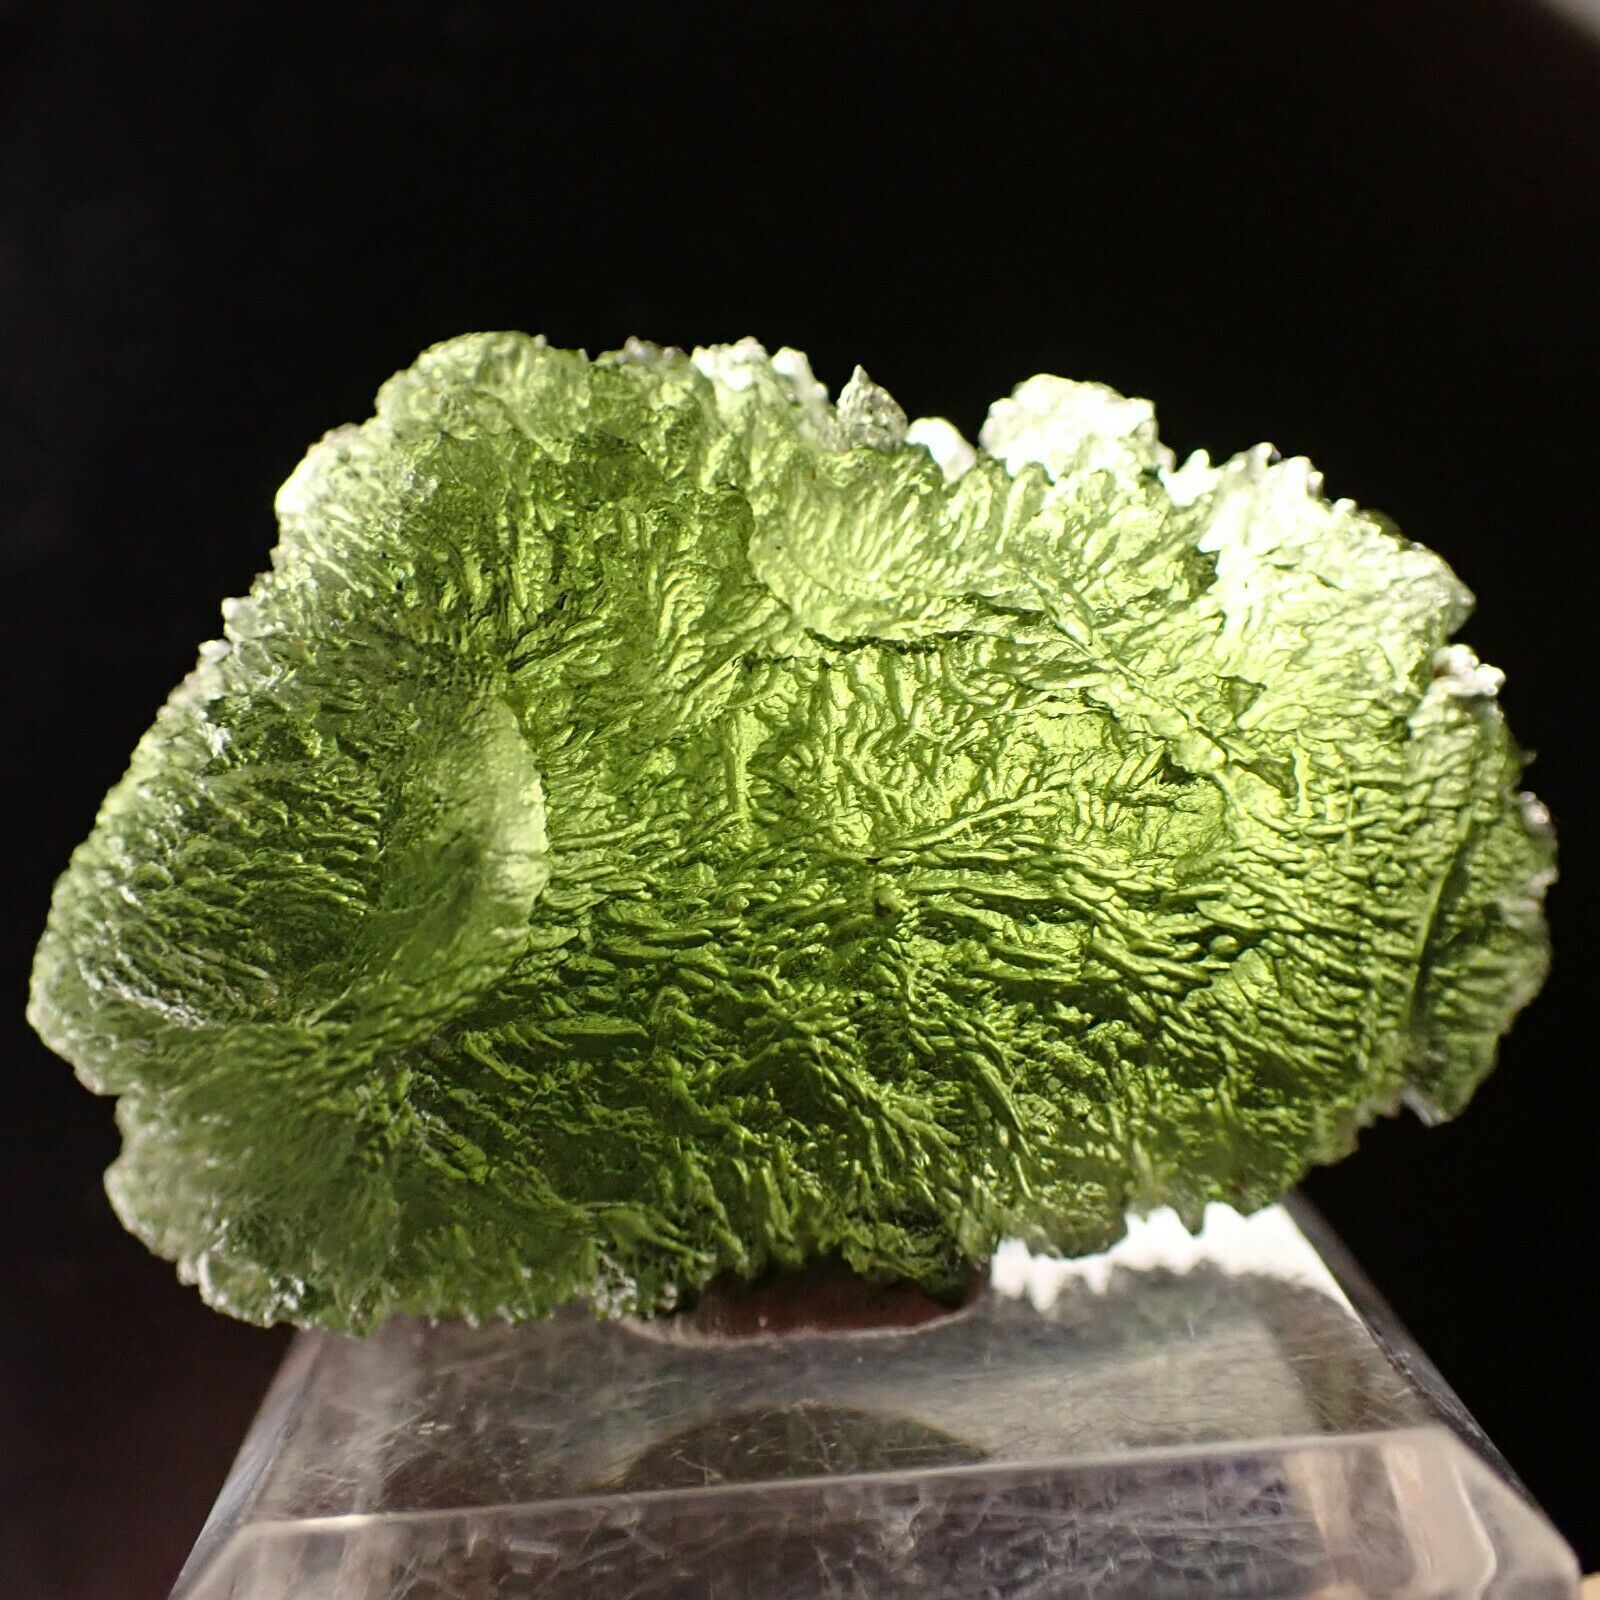 Decorative Objects Figurines 626g Moldavite Natural Czech Meteorite Impact Glass Rough Stone Crystal Energy 230701